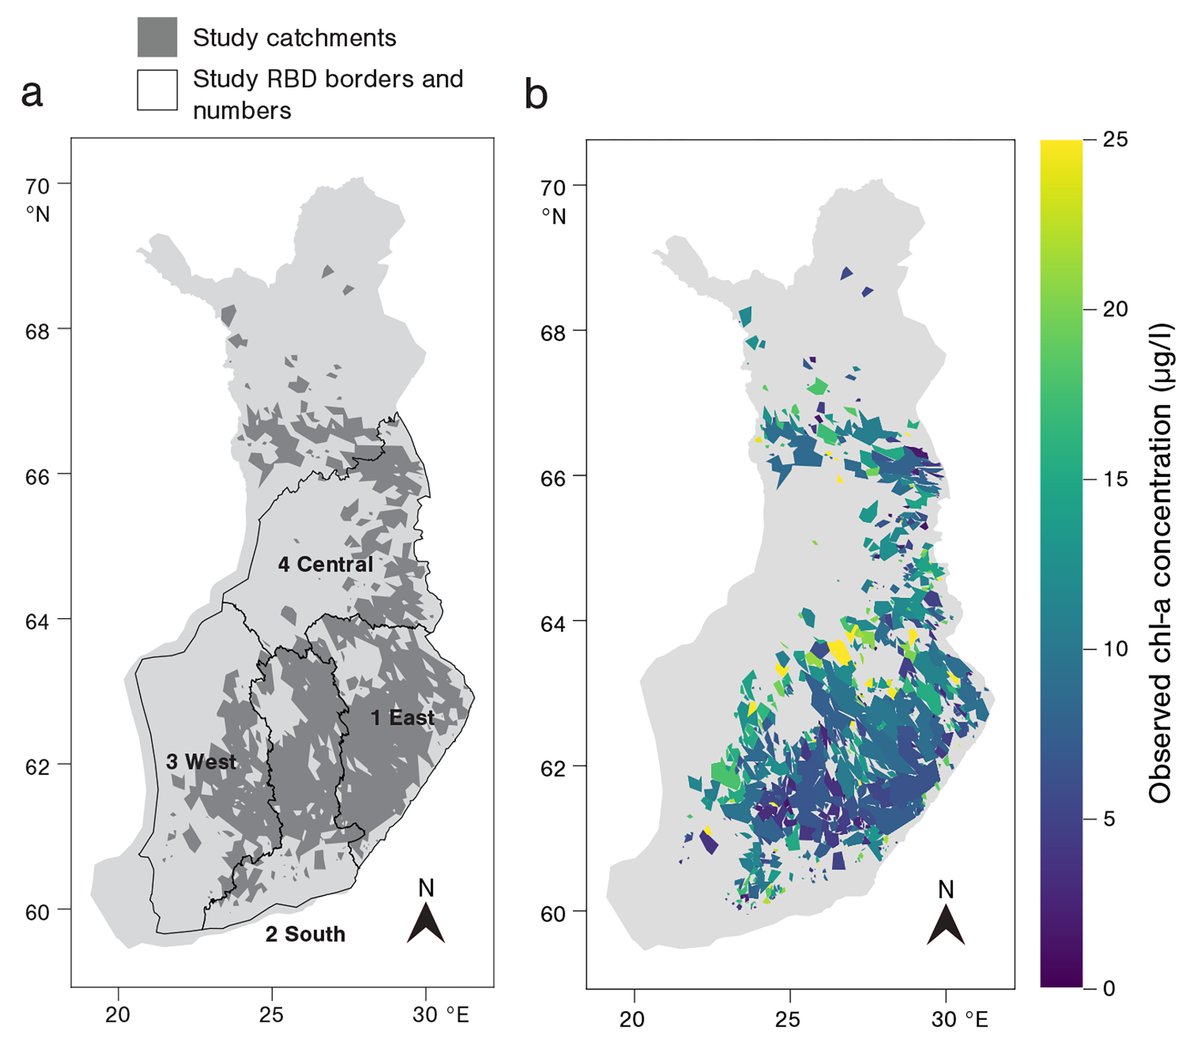 From our #EmergingTechnologies track:

A new study uses #RandomForest models to find the best predictors of #eutrophication in over 1,500 Finnish lakes

doi.org/10.1002/ecs2.4…

#MachineLearning #WaterQuality #OpenAccess @AaltoWAT